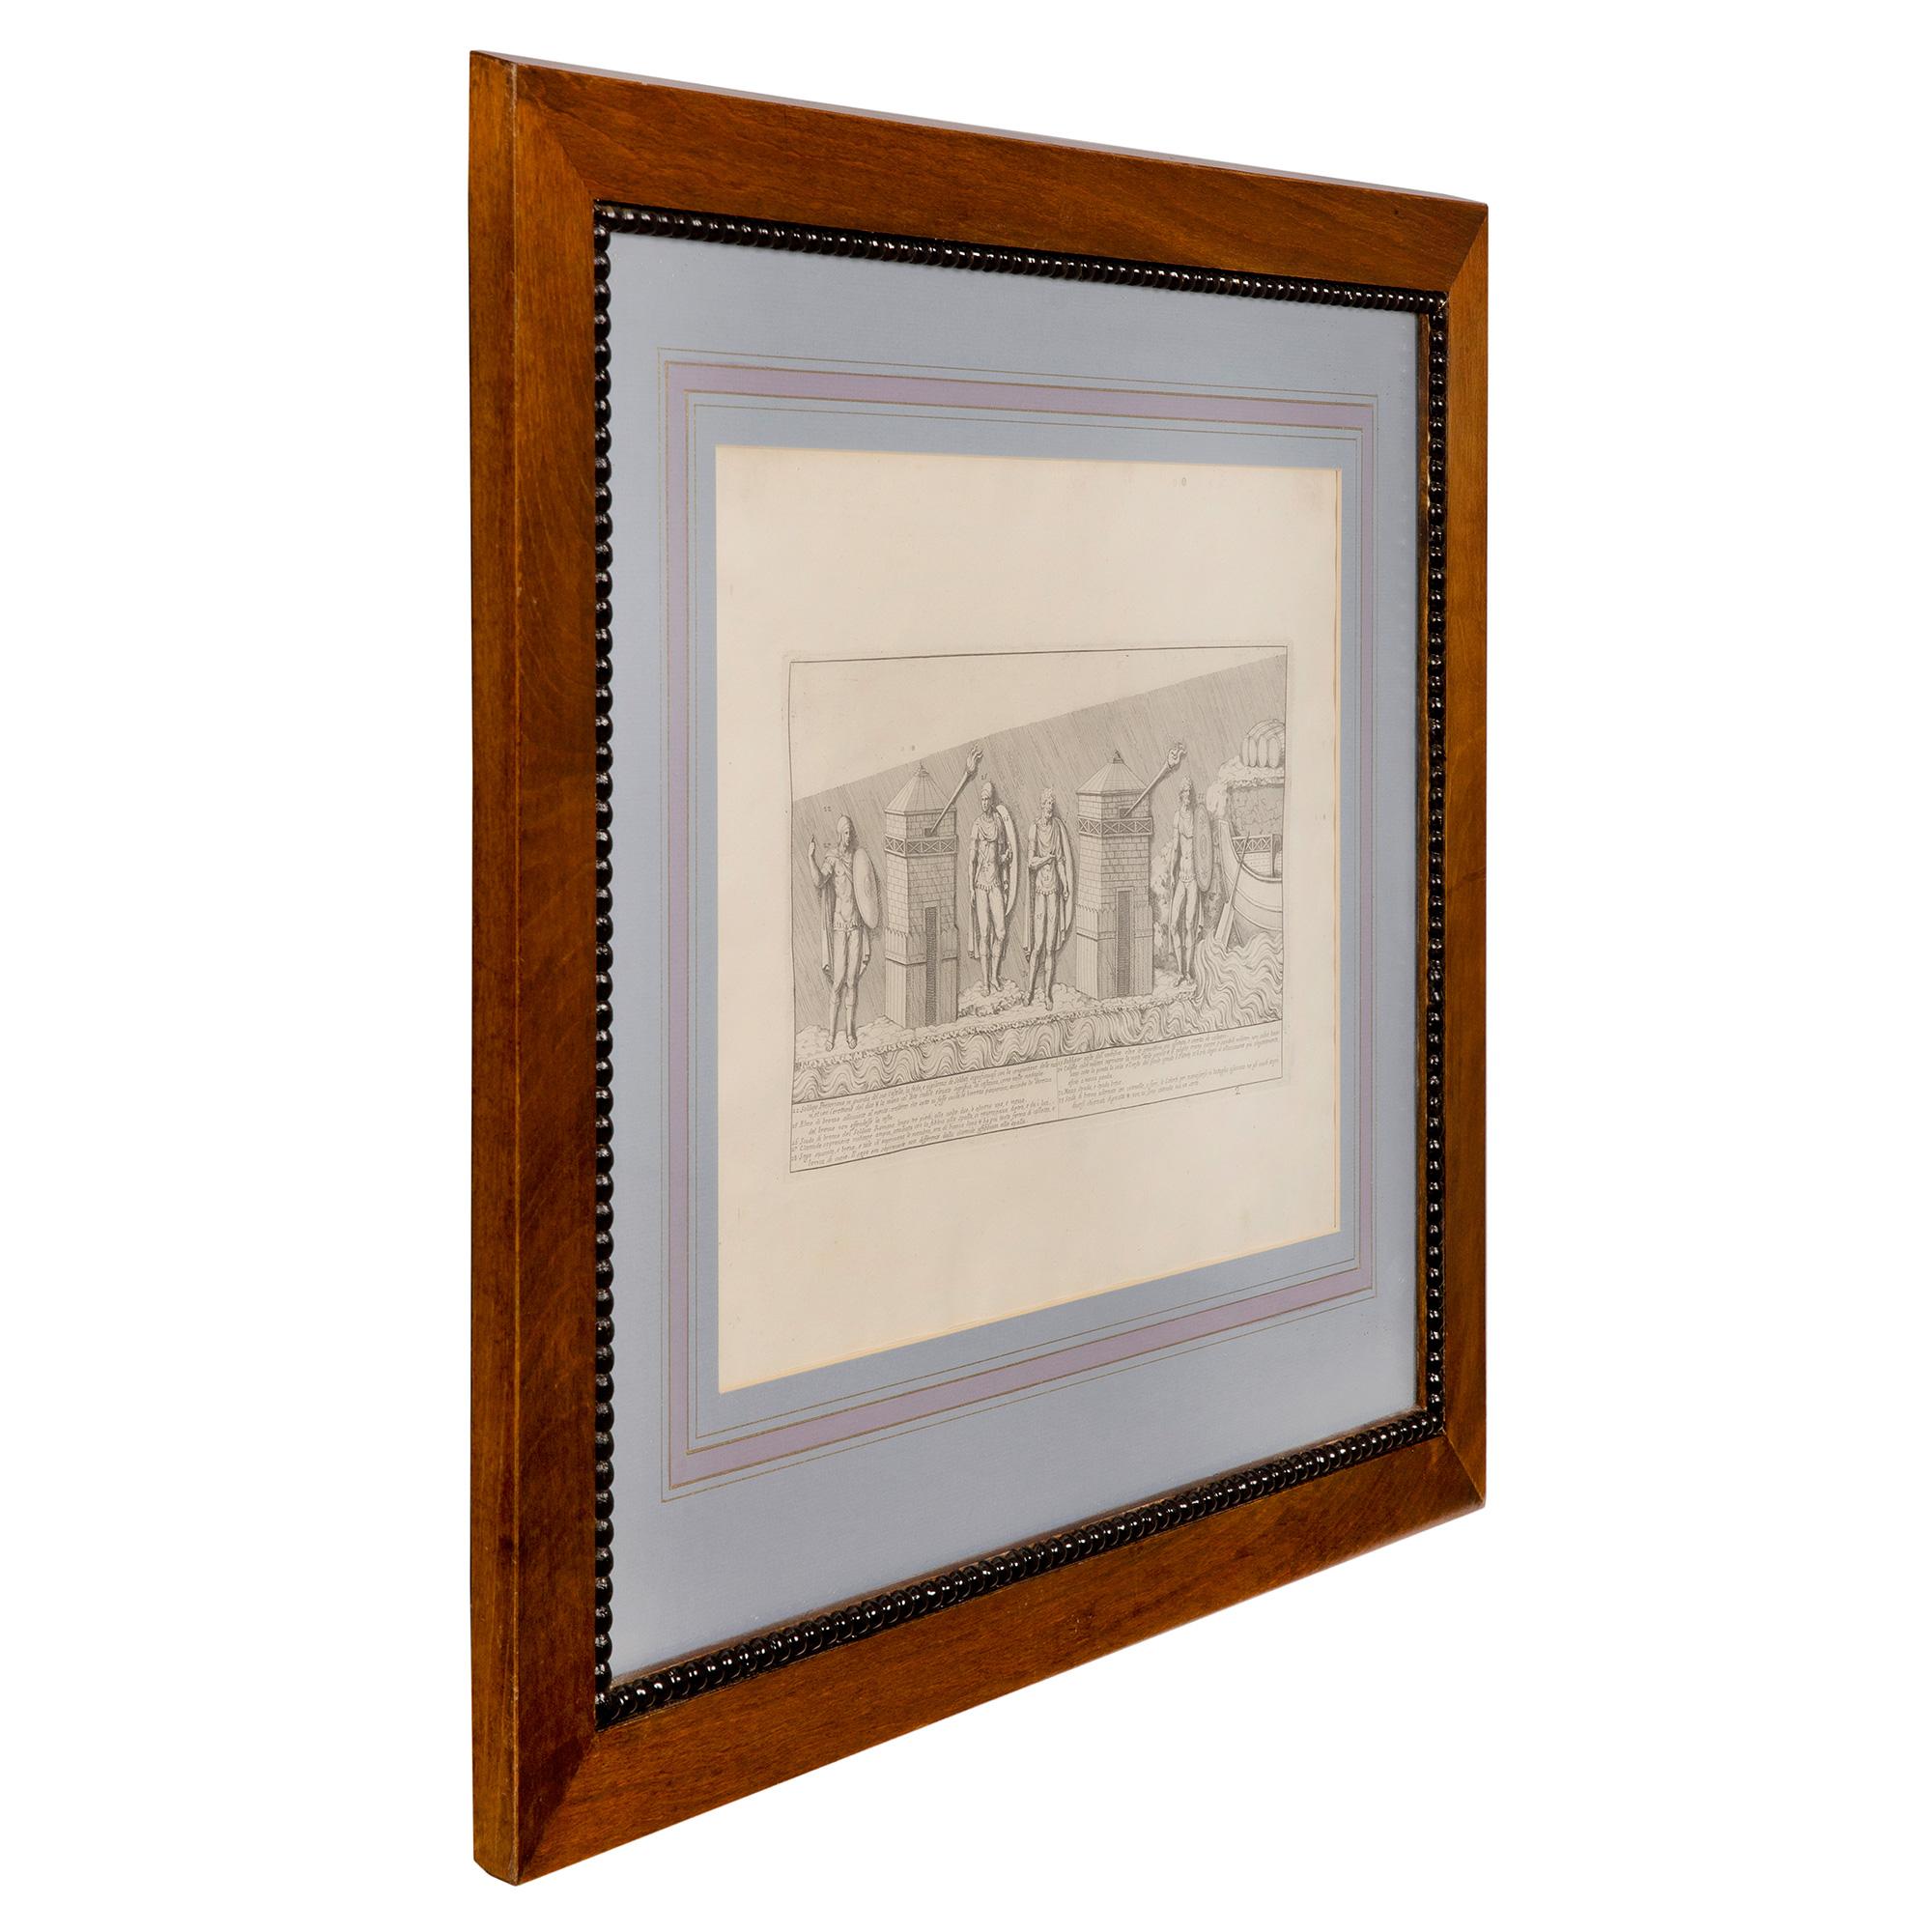 A very attractive set of four European 19th century prints in their original oak frames. Each beautiful print depicts soldiers on foot and horseback with chariots and boat marching off to war. Each are printed in black and white and are set in their